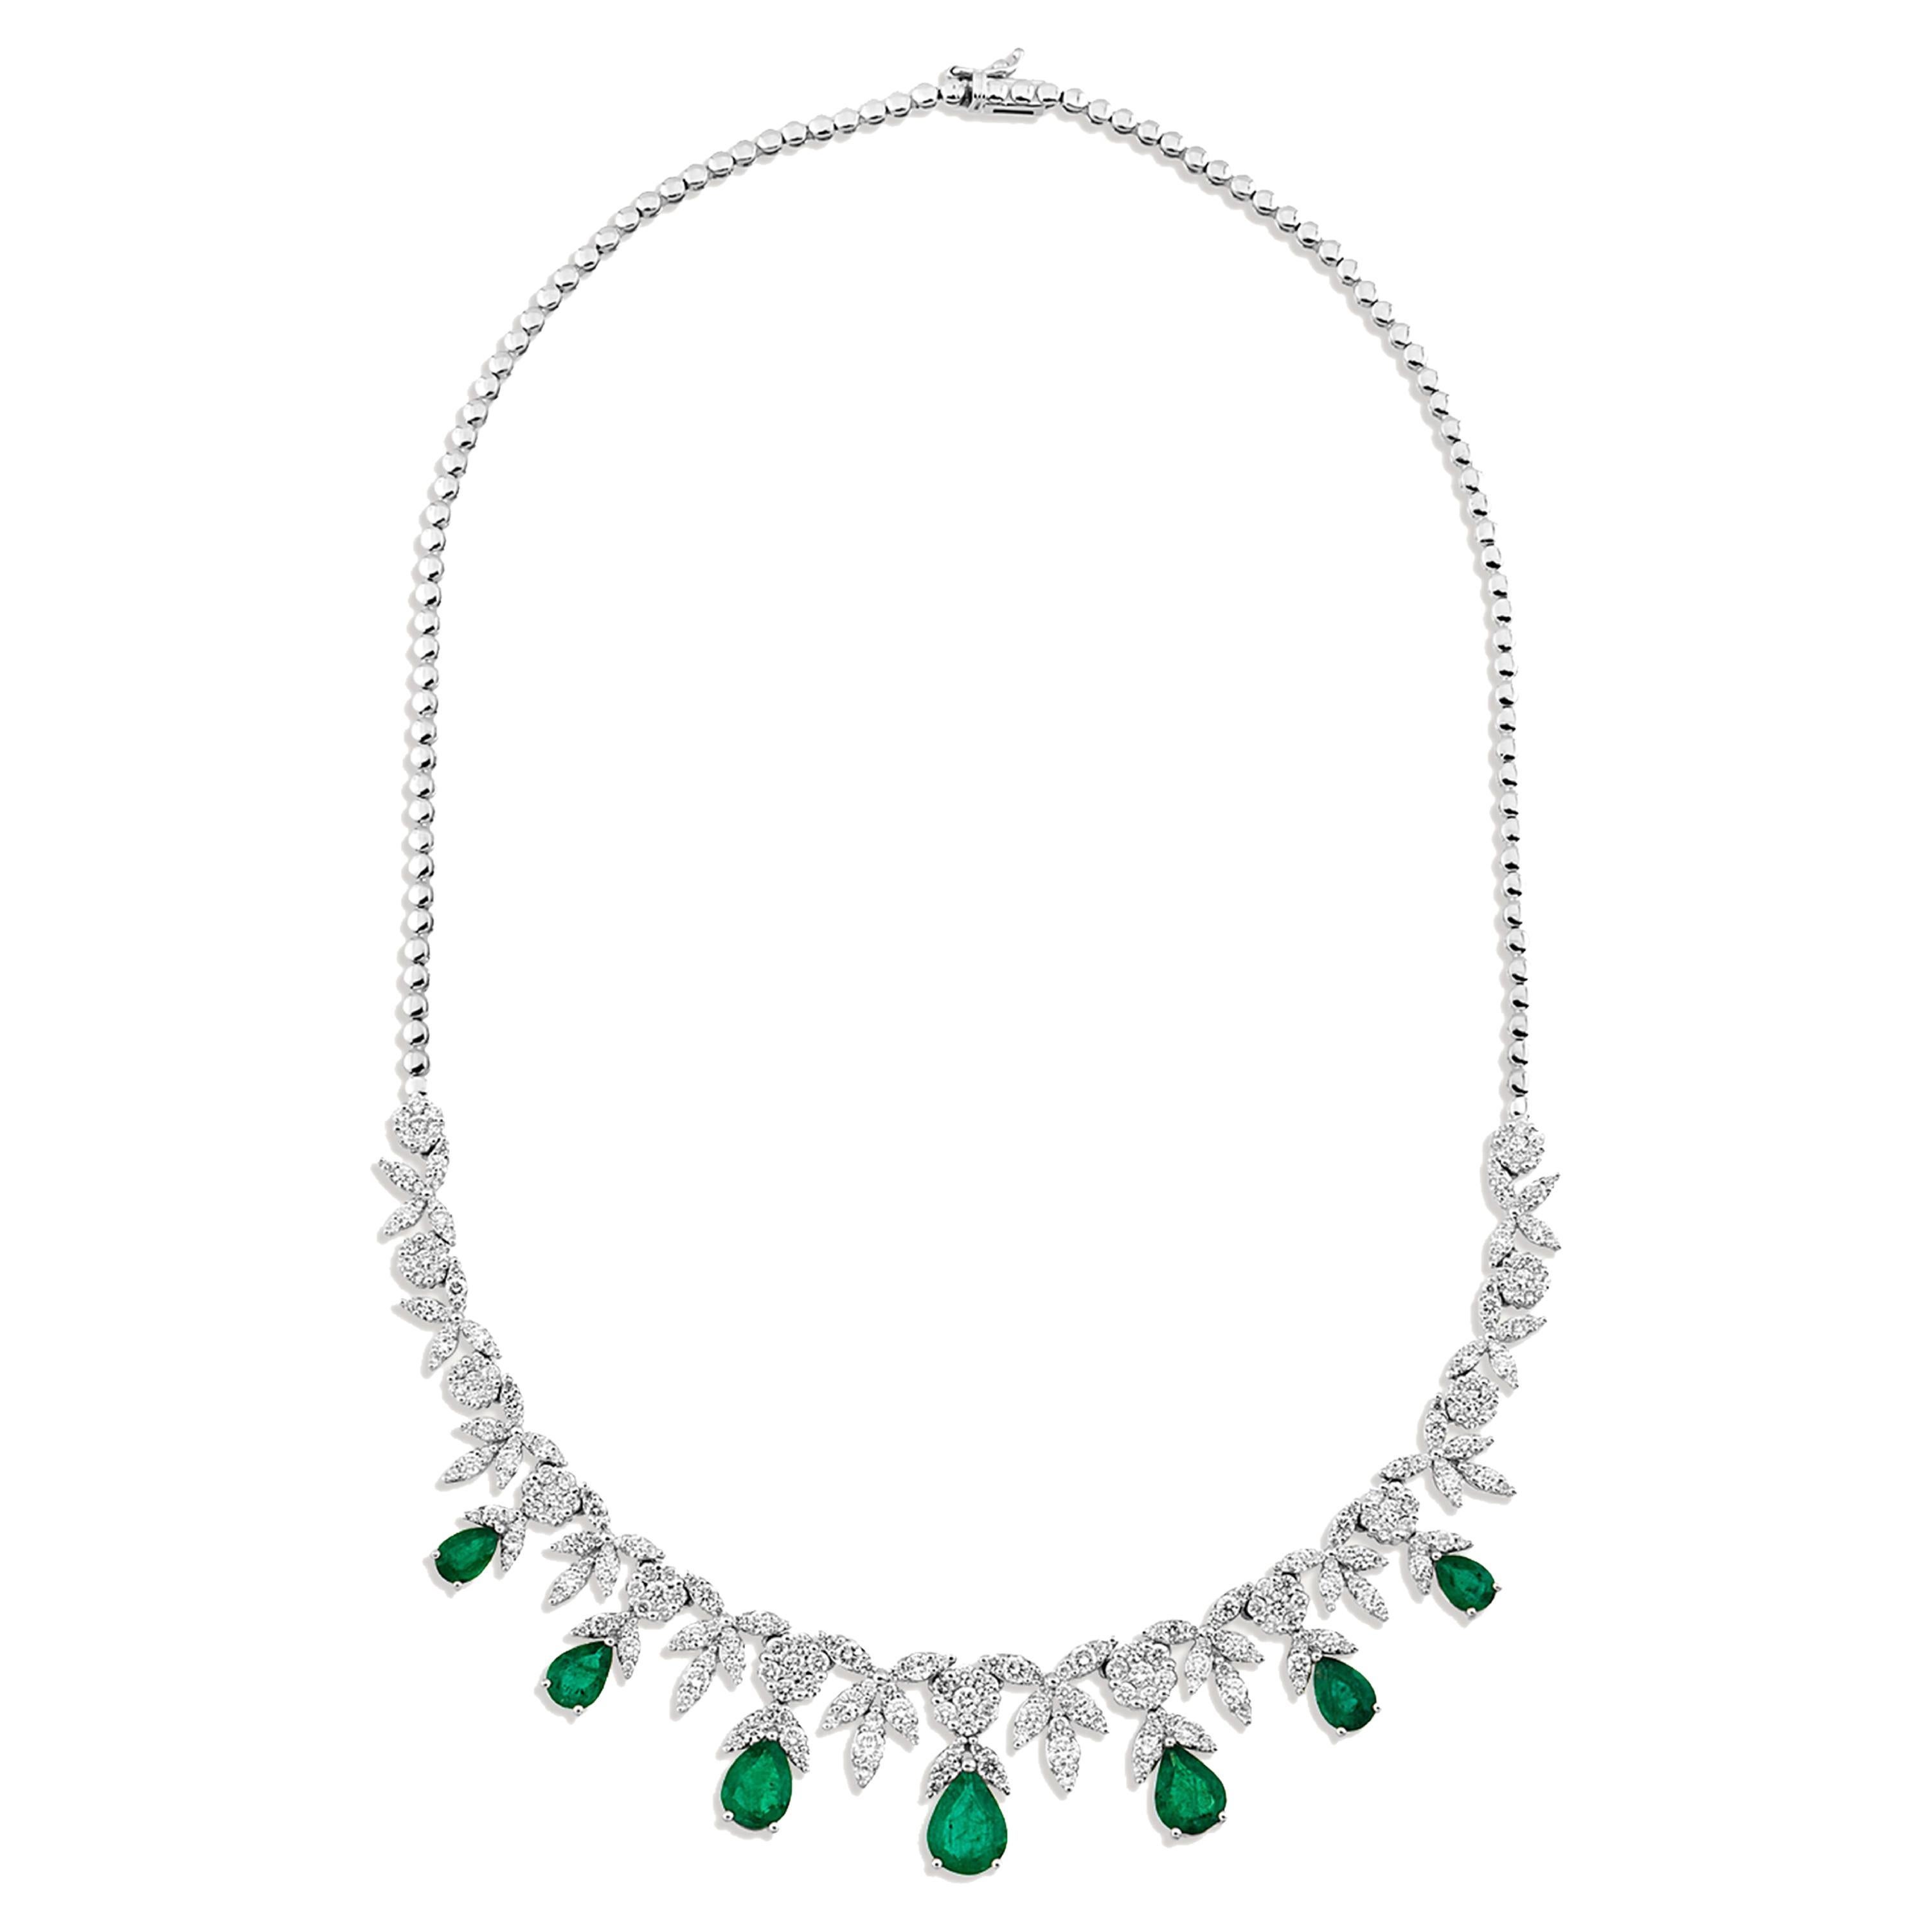 Emerald and Diamond 9.95 Carat Necklace in 18K White Gold For Sale